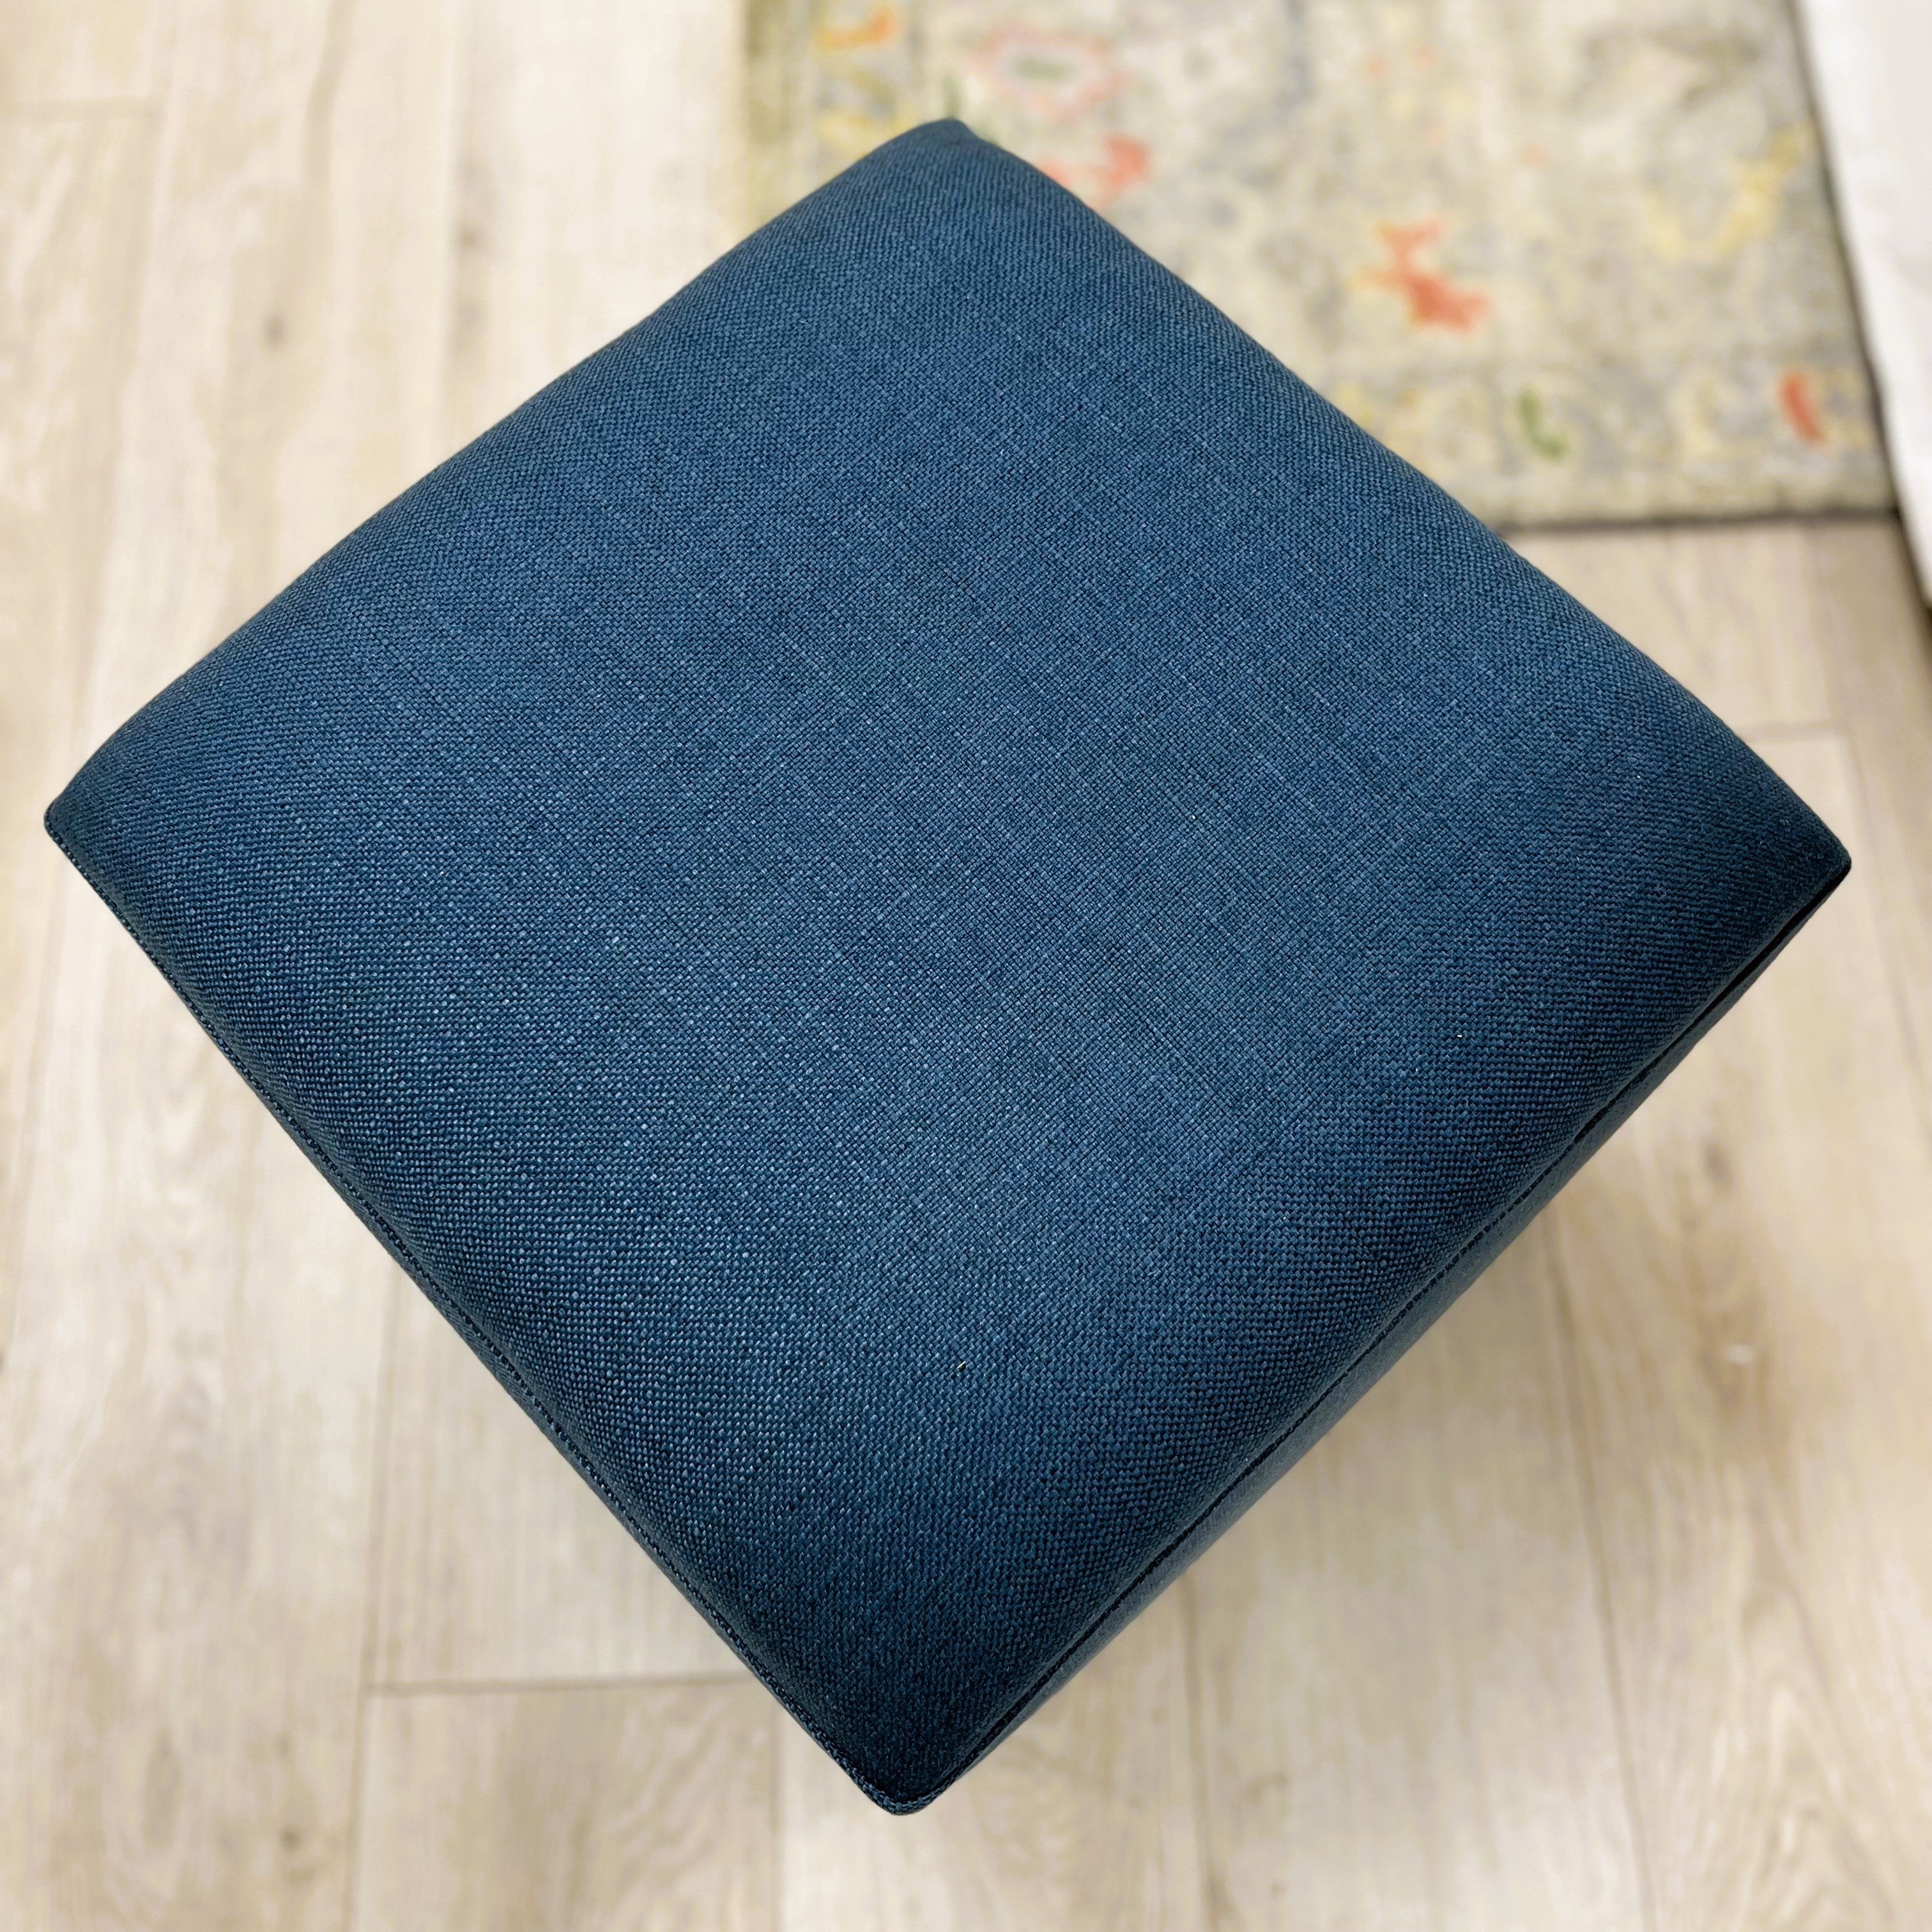 Benny Accent Stool